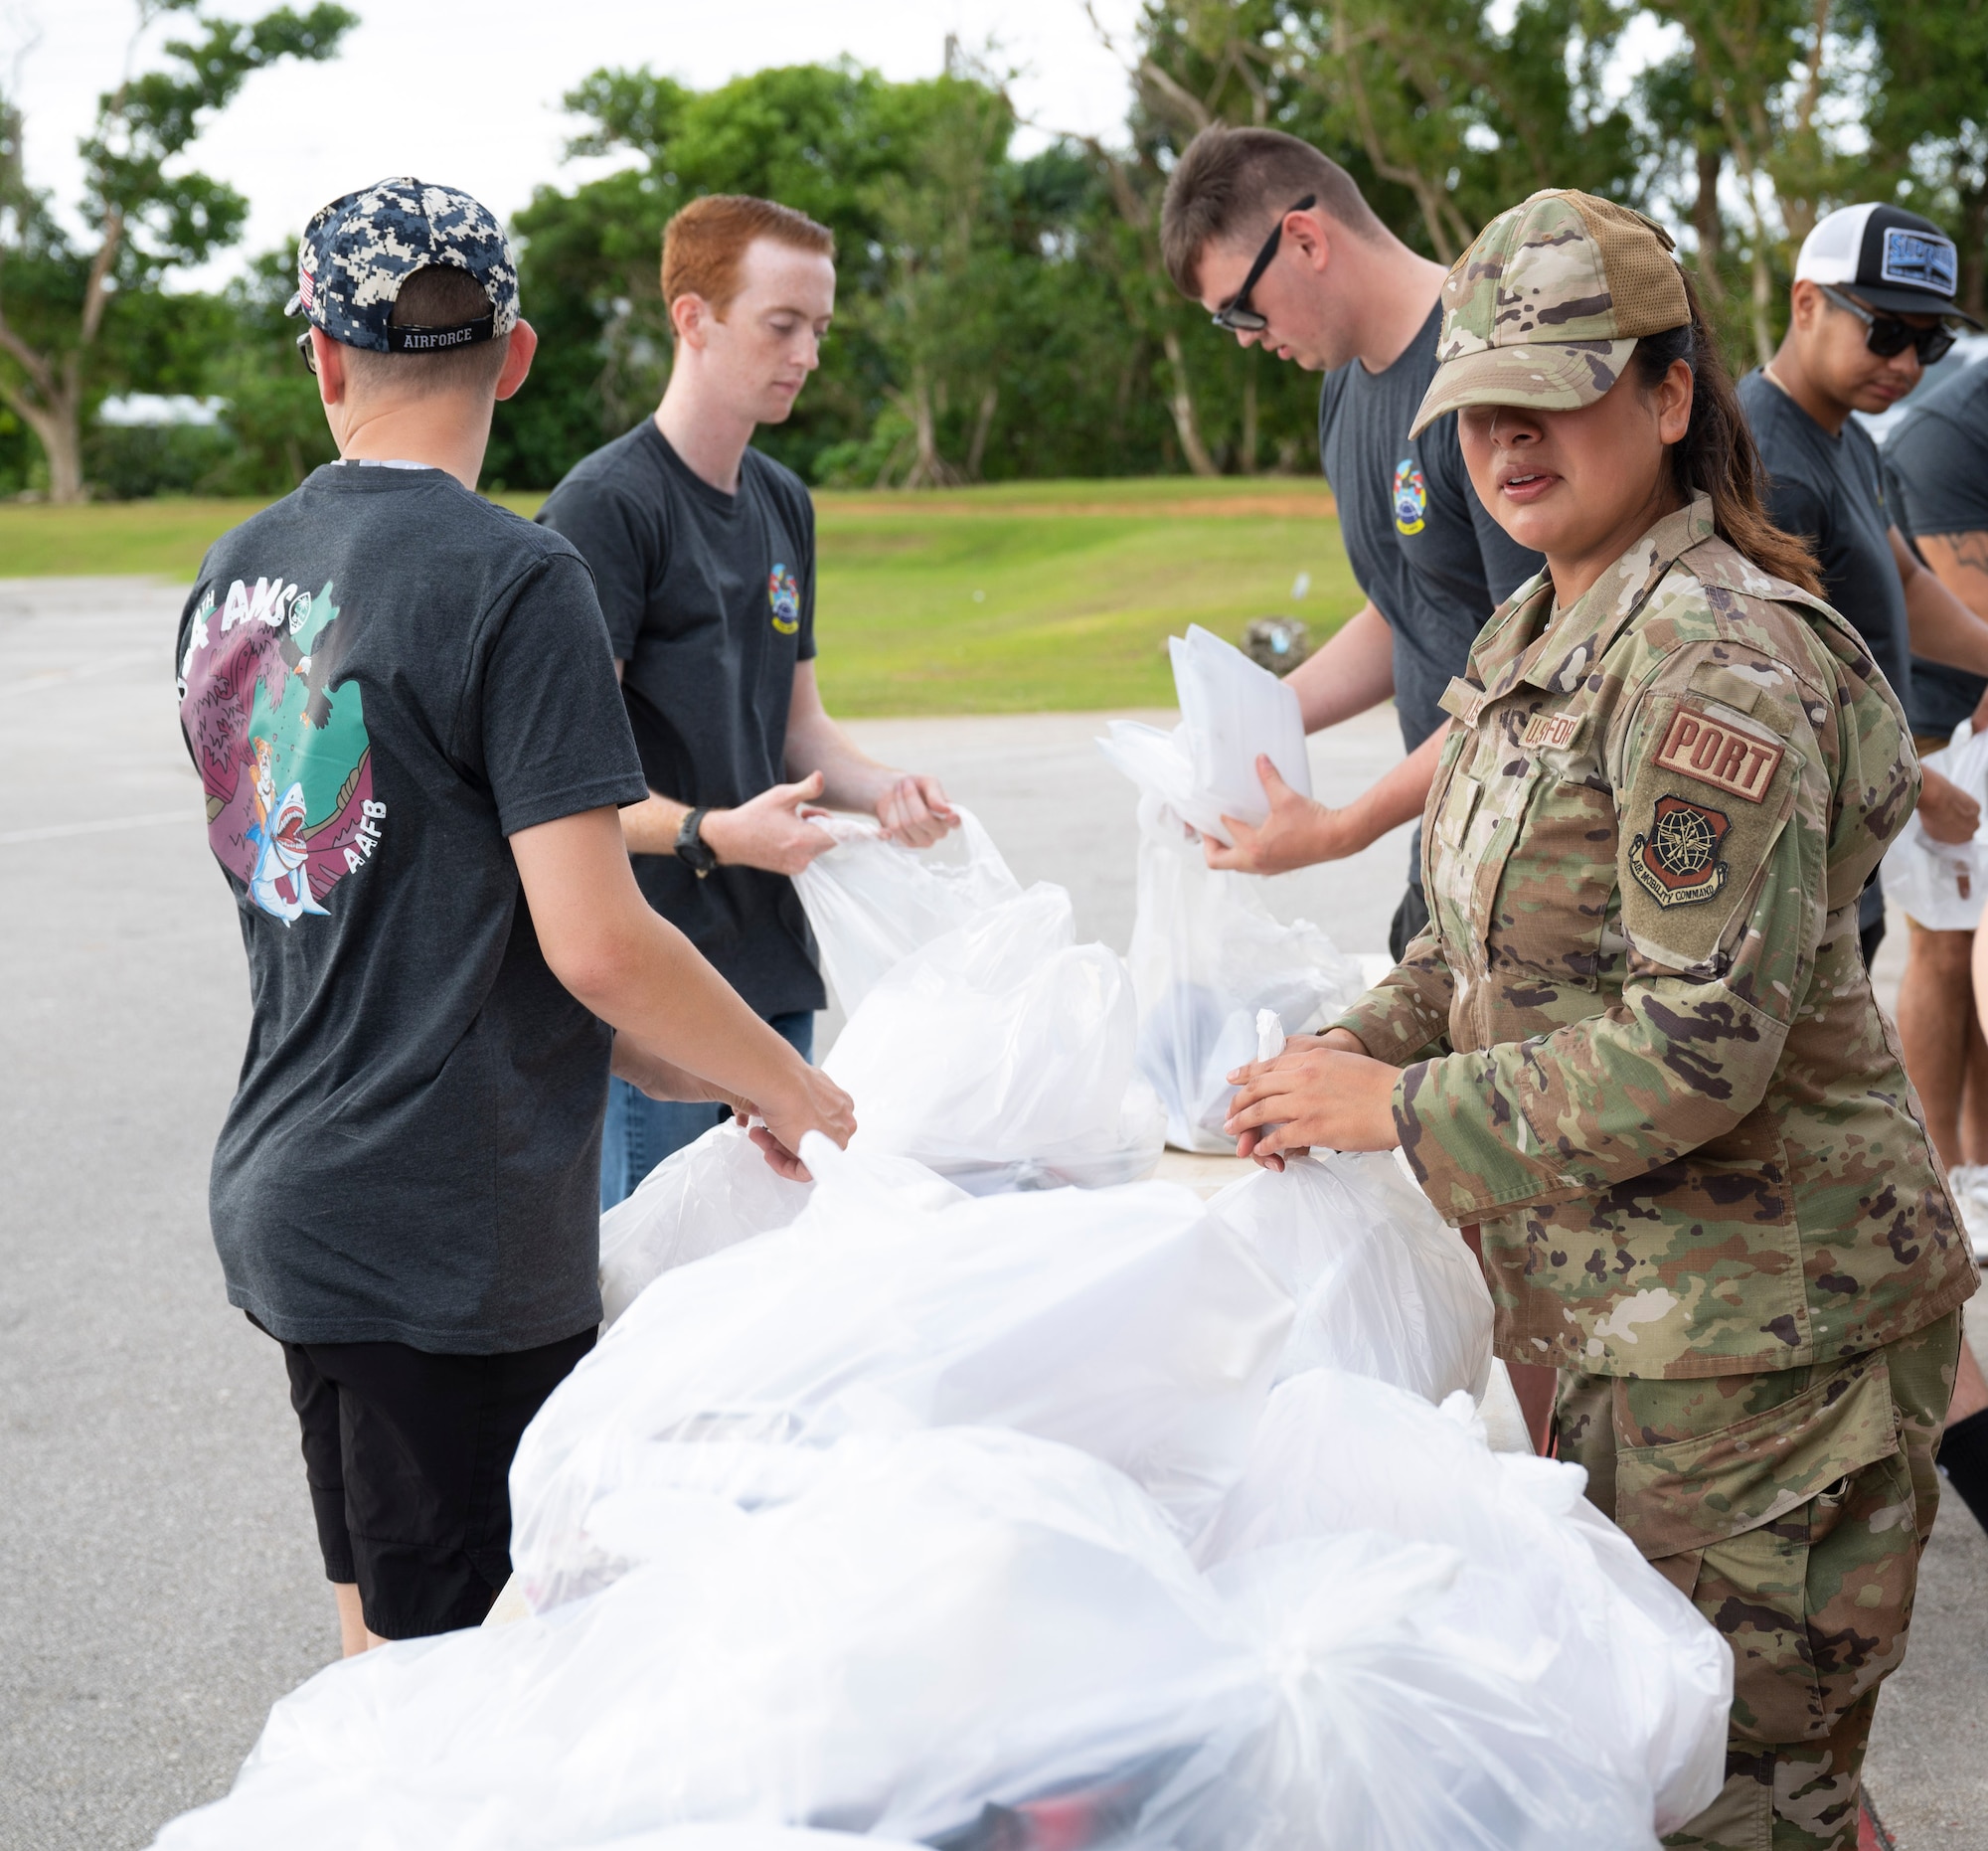 U.S. Air Force members assigned to the 734th Air Mobility Squadron, bag food during a volunteer event in Dededo, Guam, December 15, 2023. The 734 AMS volunteered to help Dededo as part of the Sister Village Sister Squadron program. They collected food, toiletry, and lifesaving equipment donations and helped hand them out to local families. (U.S. Air Force photo by Airman 1st Class Spencer Perkins)